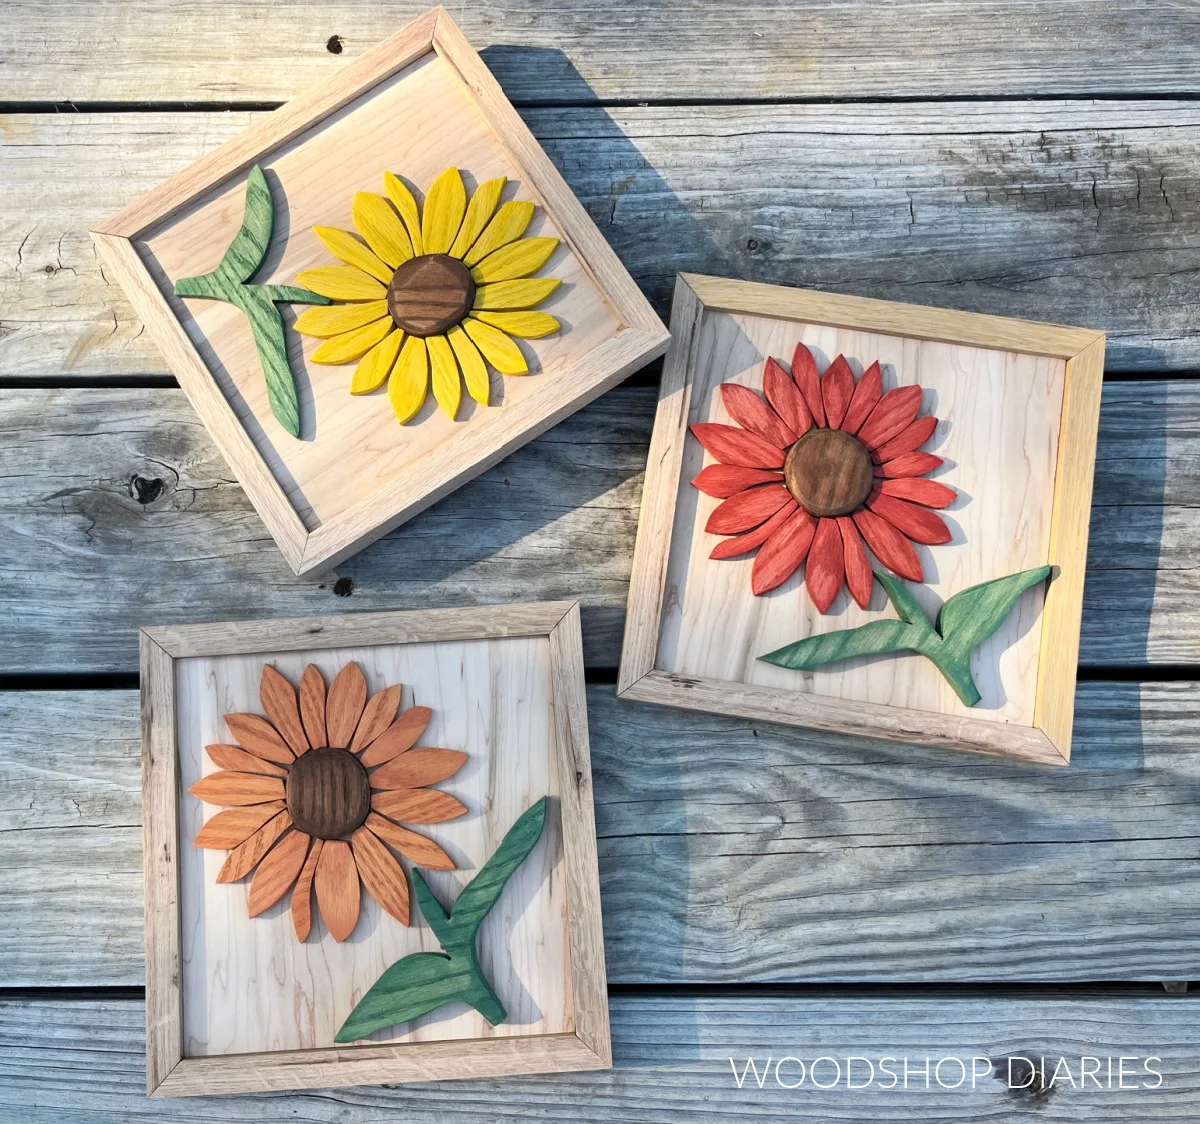 Sunflower wood art from Woodshop Diaries.